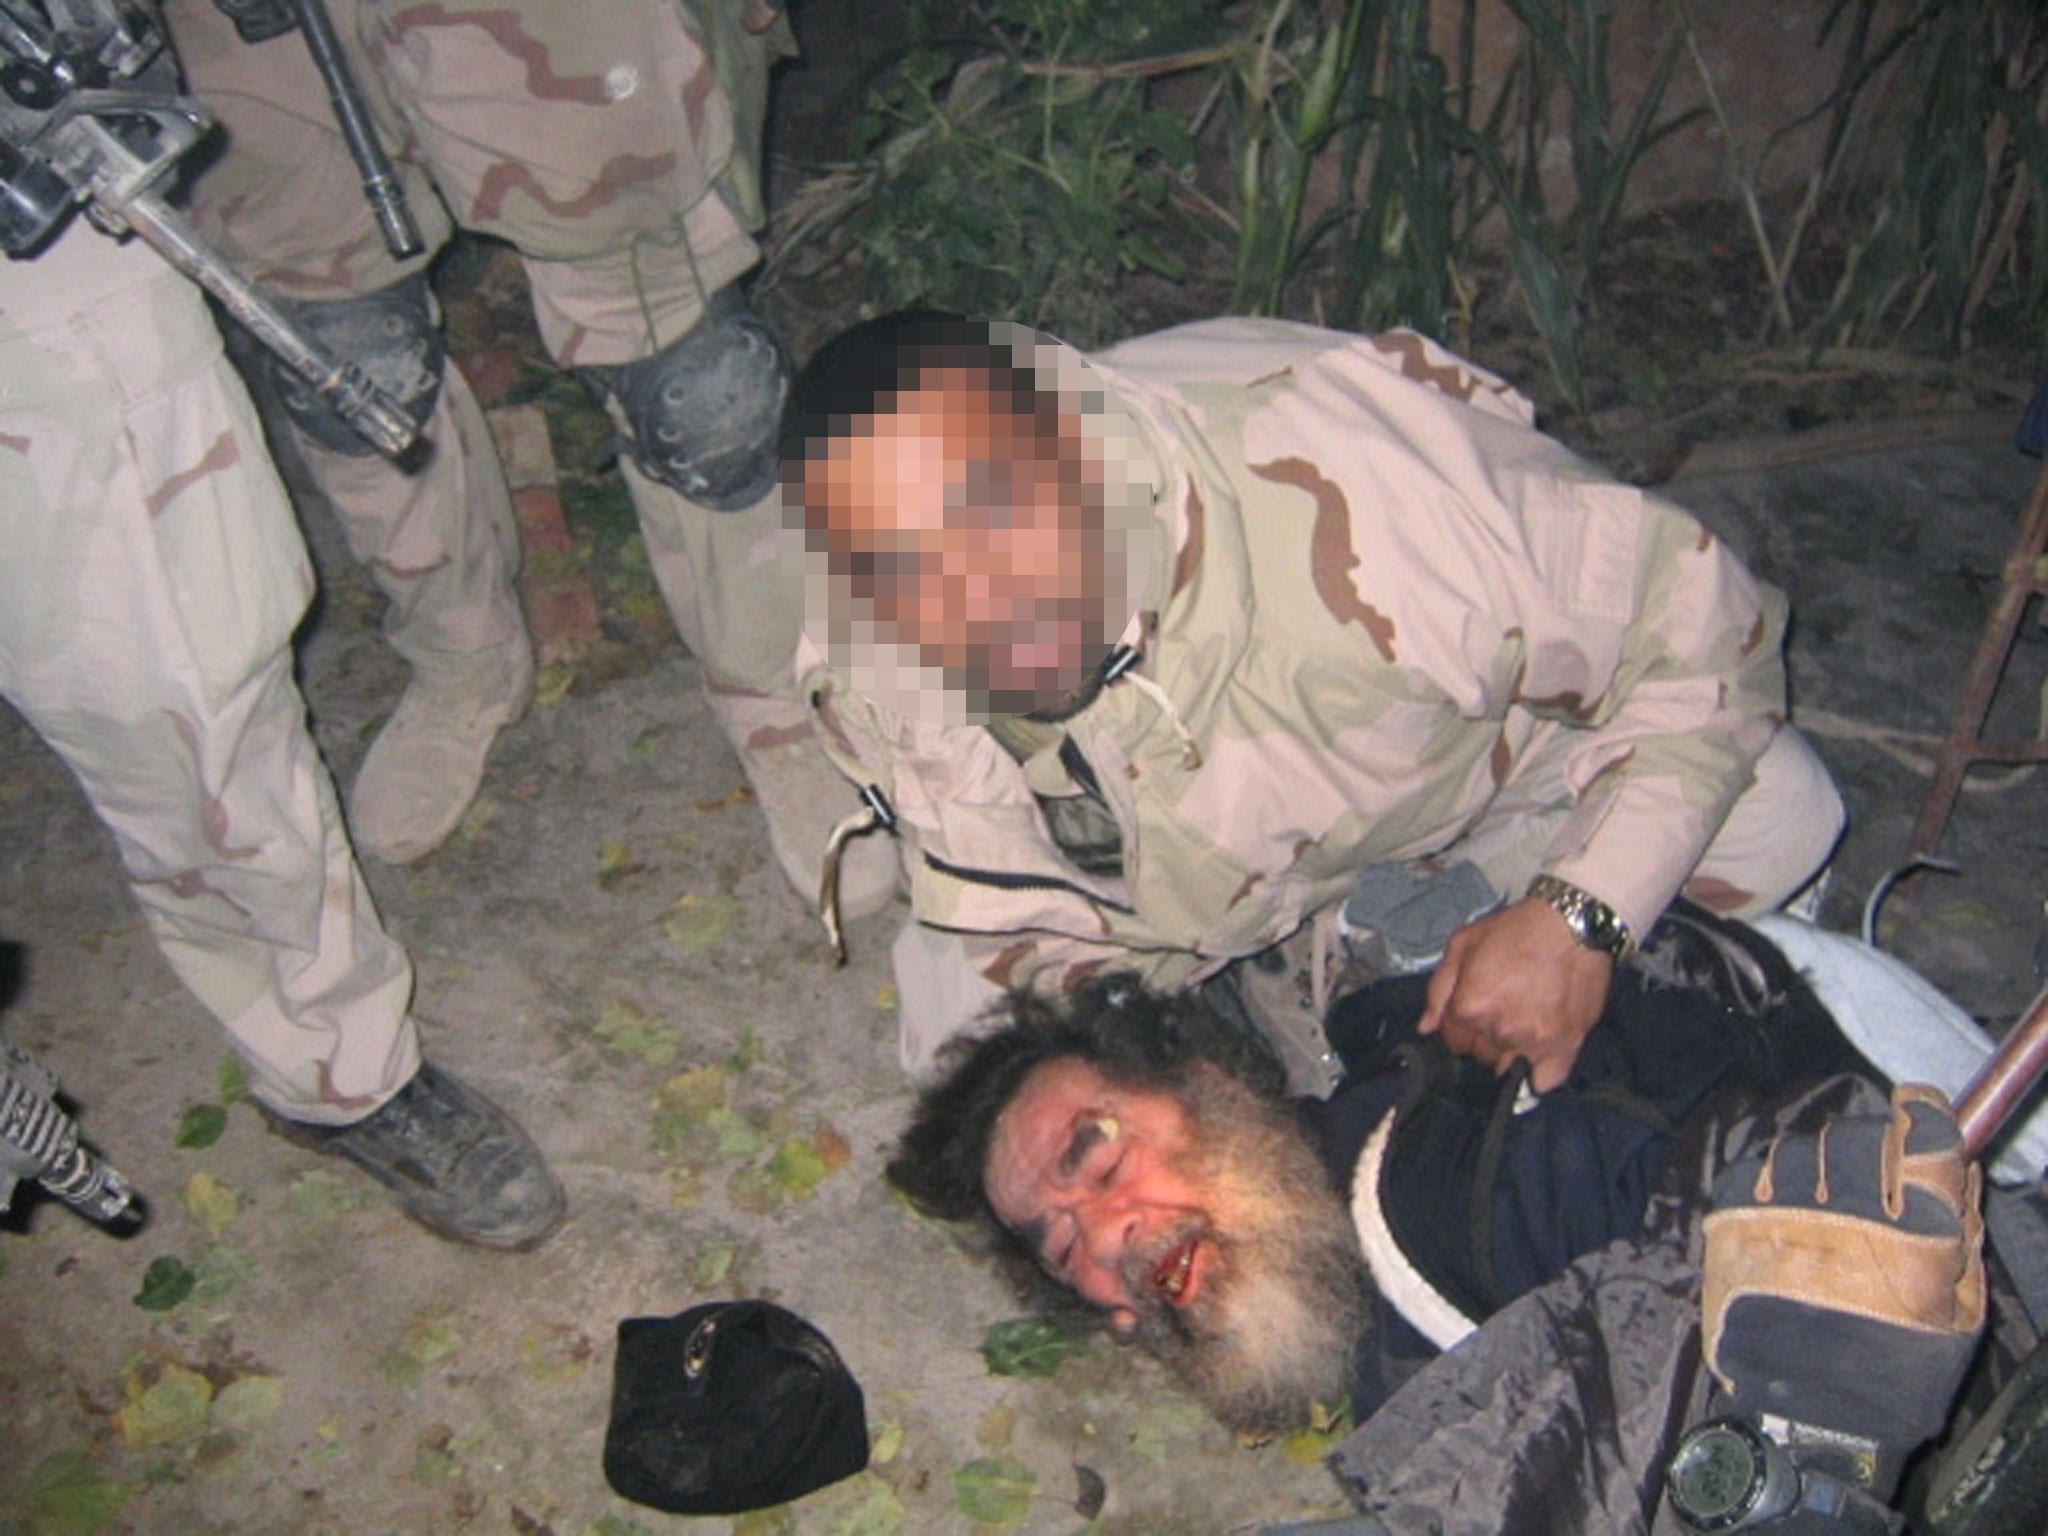 Saddam Hussein was executed in 2006